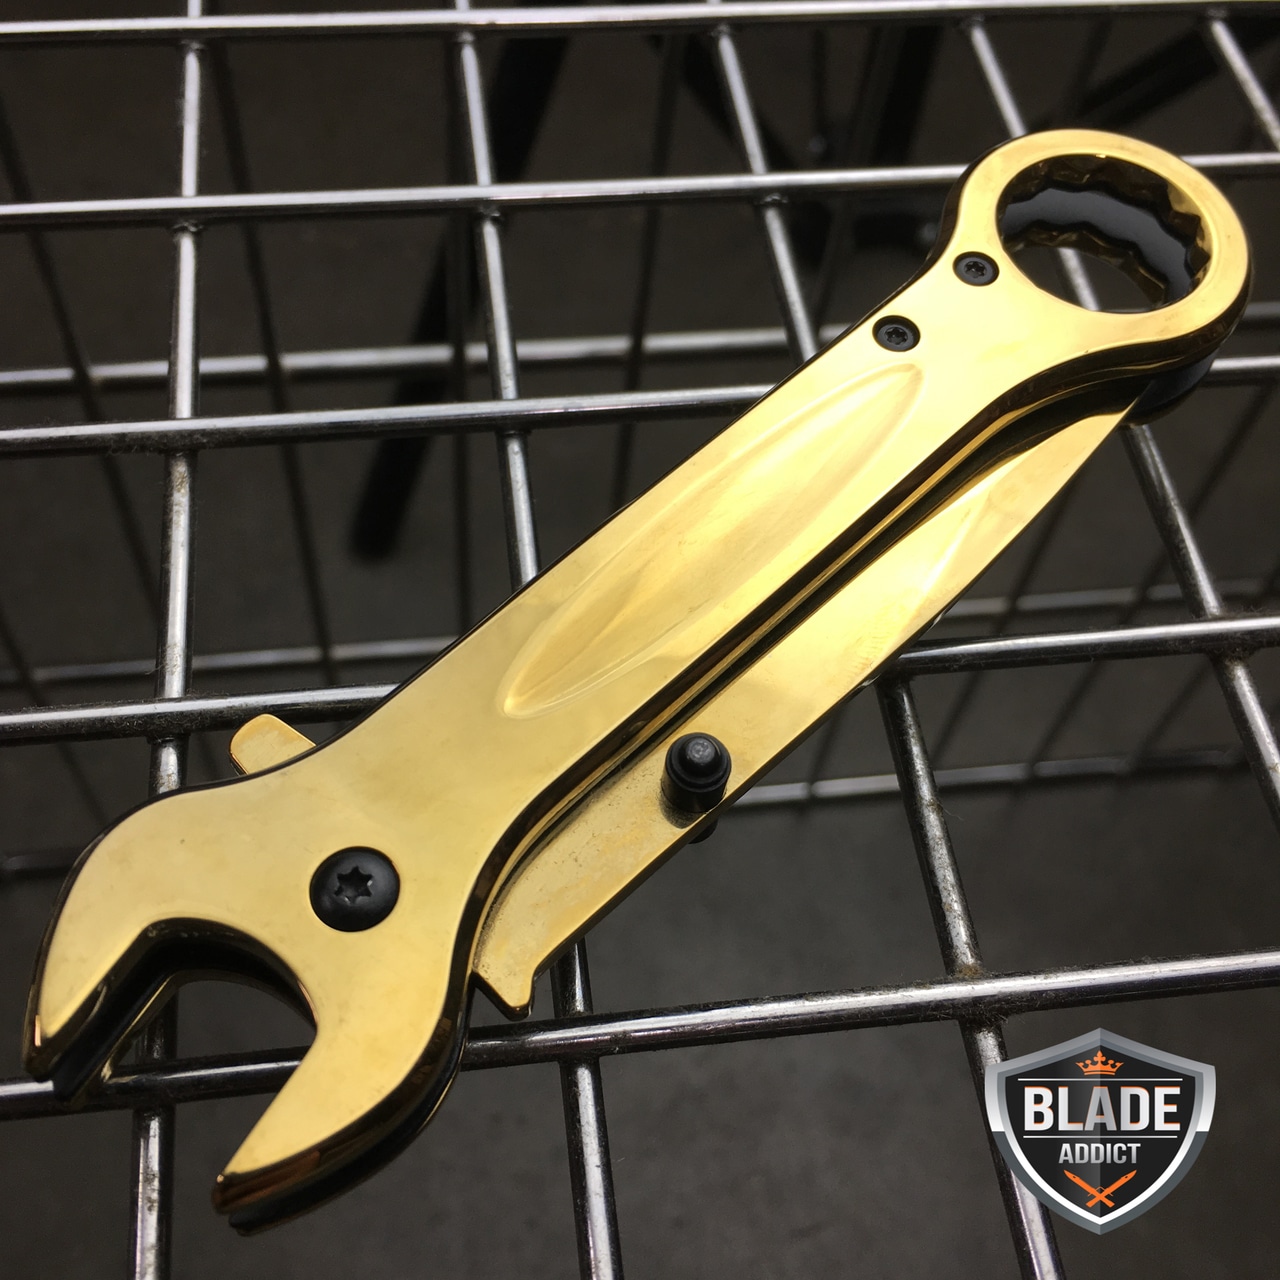 7.5" MULTI-TOOL WRENCH TACTICAL SPRING ASSISTED OPEN FOLDING POCKET KNIFE GOLD